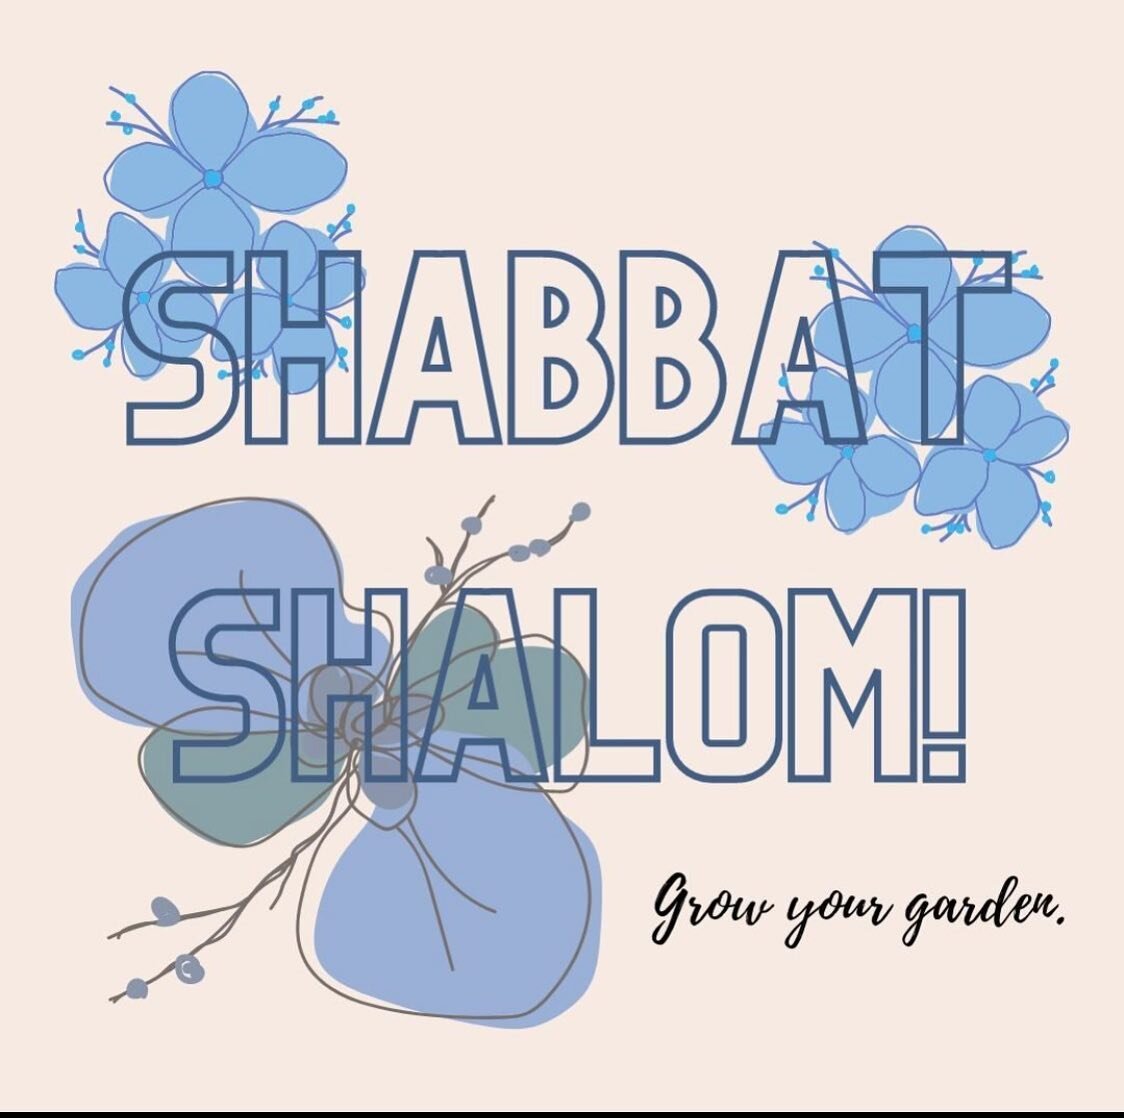 Shabbat Shalom to the Orot community and beyond. May your flourish and grow your own. Grow your Haden 🌸🌺🌷